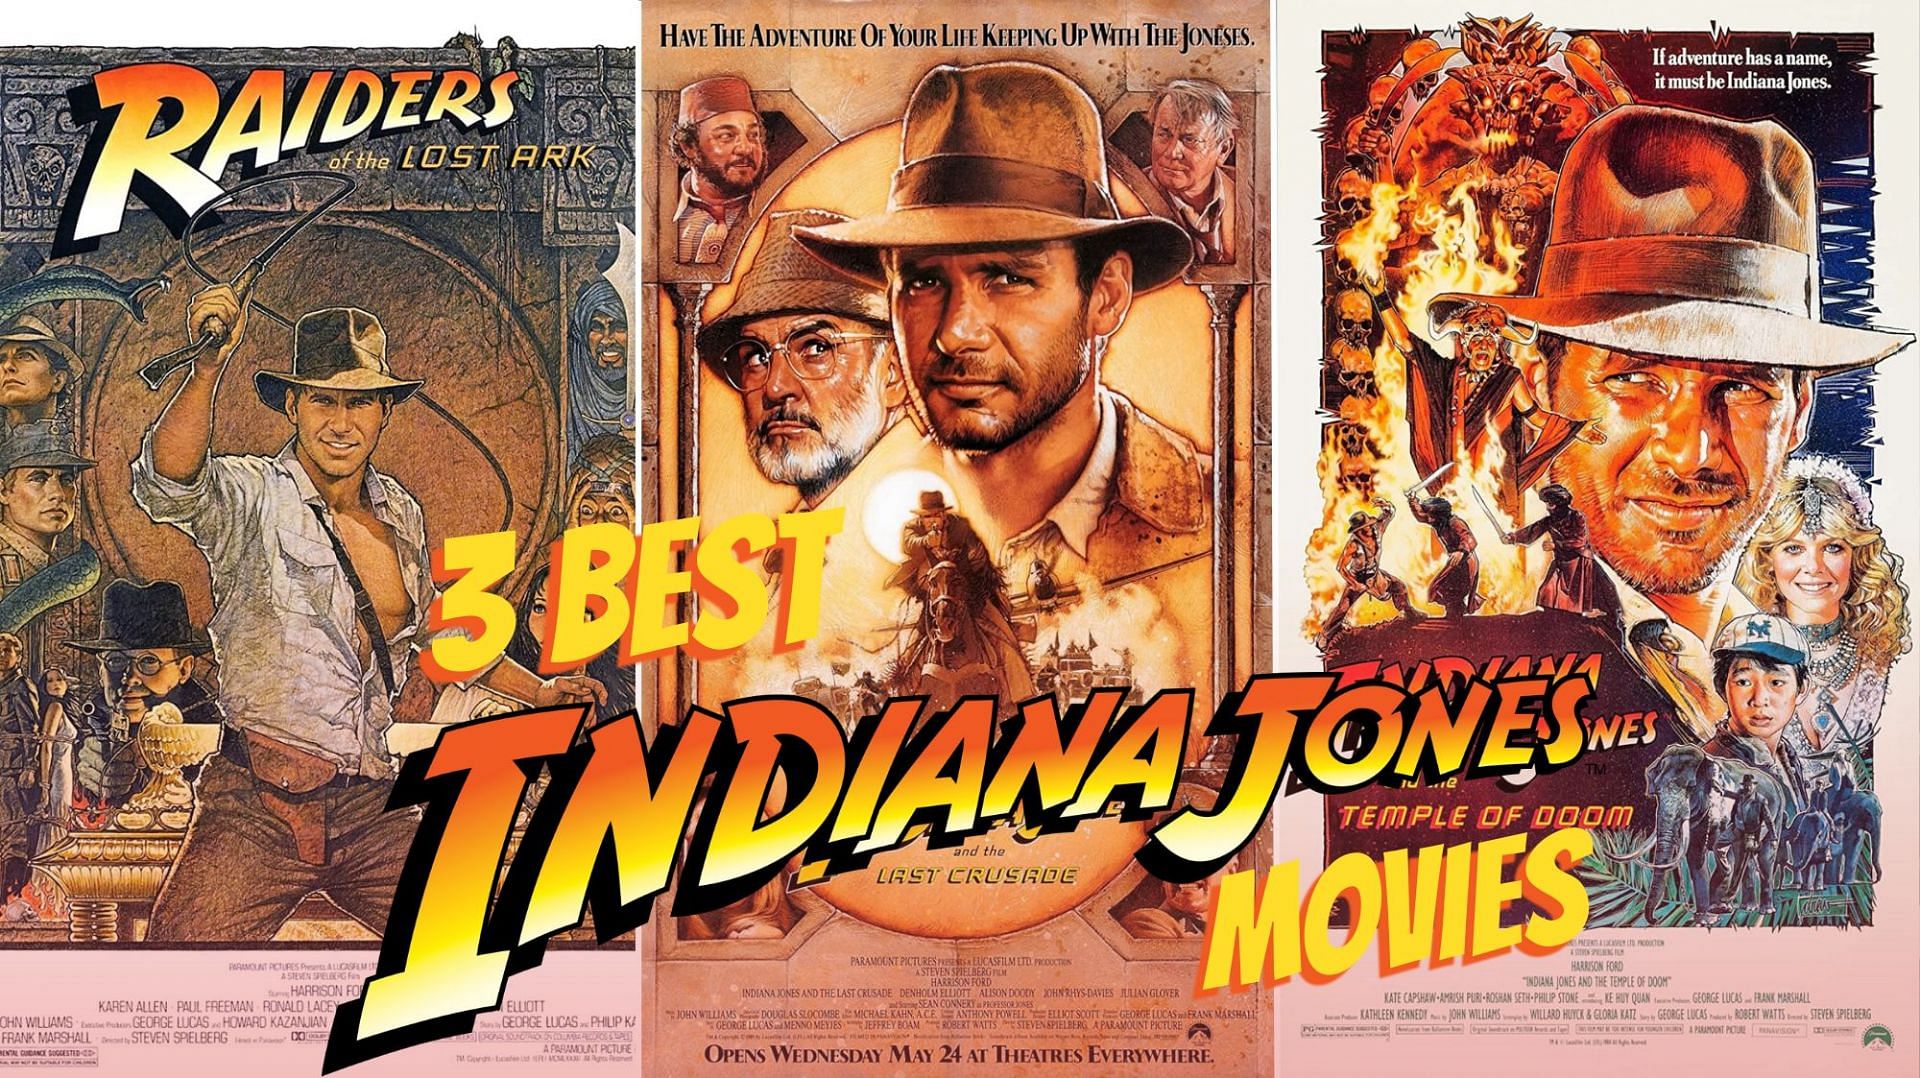 Original Film Title: INDIANA JONES AND THE KINGDOM OF THE CRYSTAL SKULL.  English Title: INDIANA JONES AND THE KINGDOM OF THE CRYSTAL SKULL. Film  Director: STEVEN SPIELBERG. Year: 2008. Stars: HARRISON FORD.